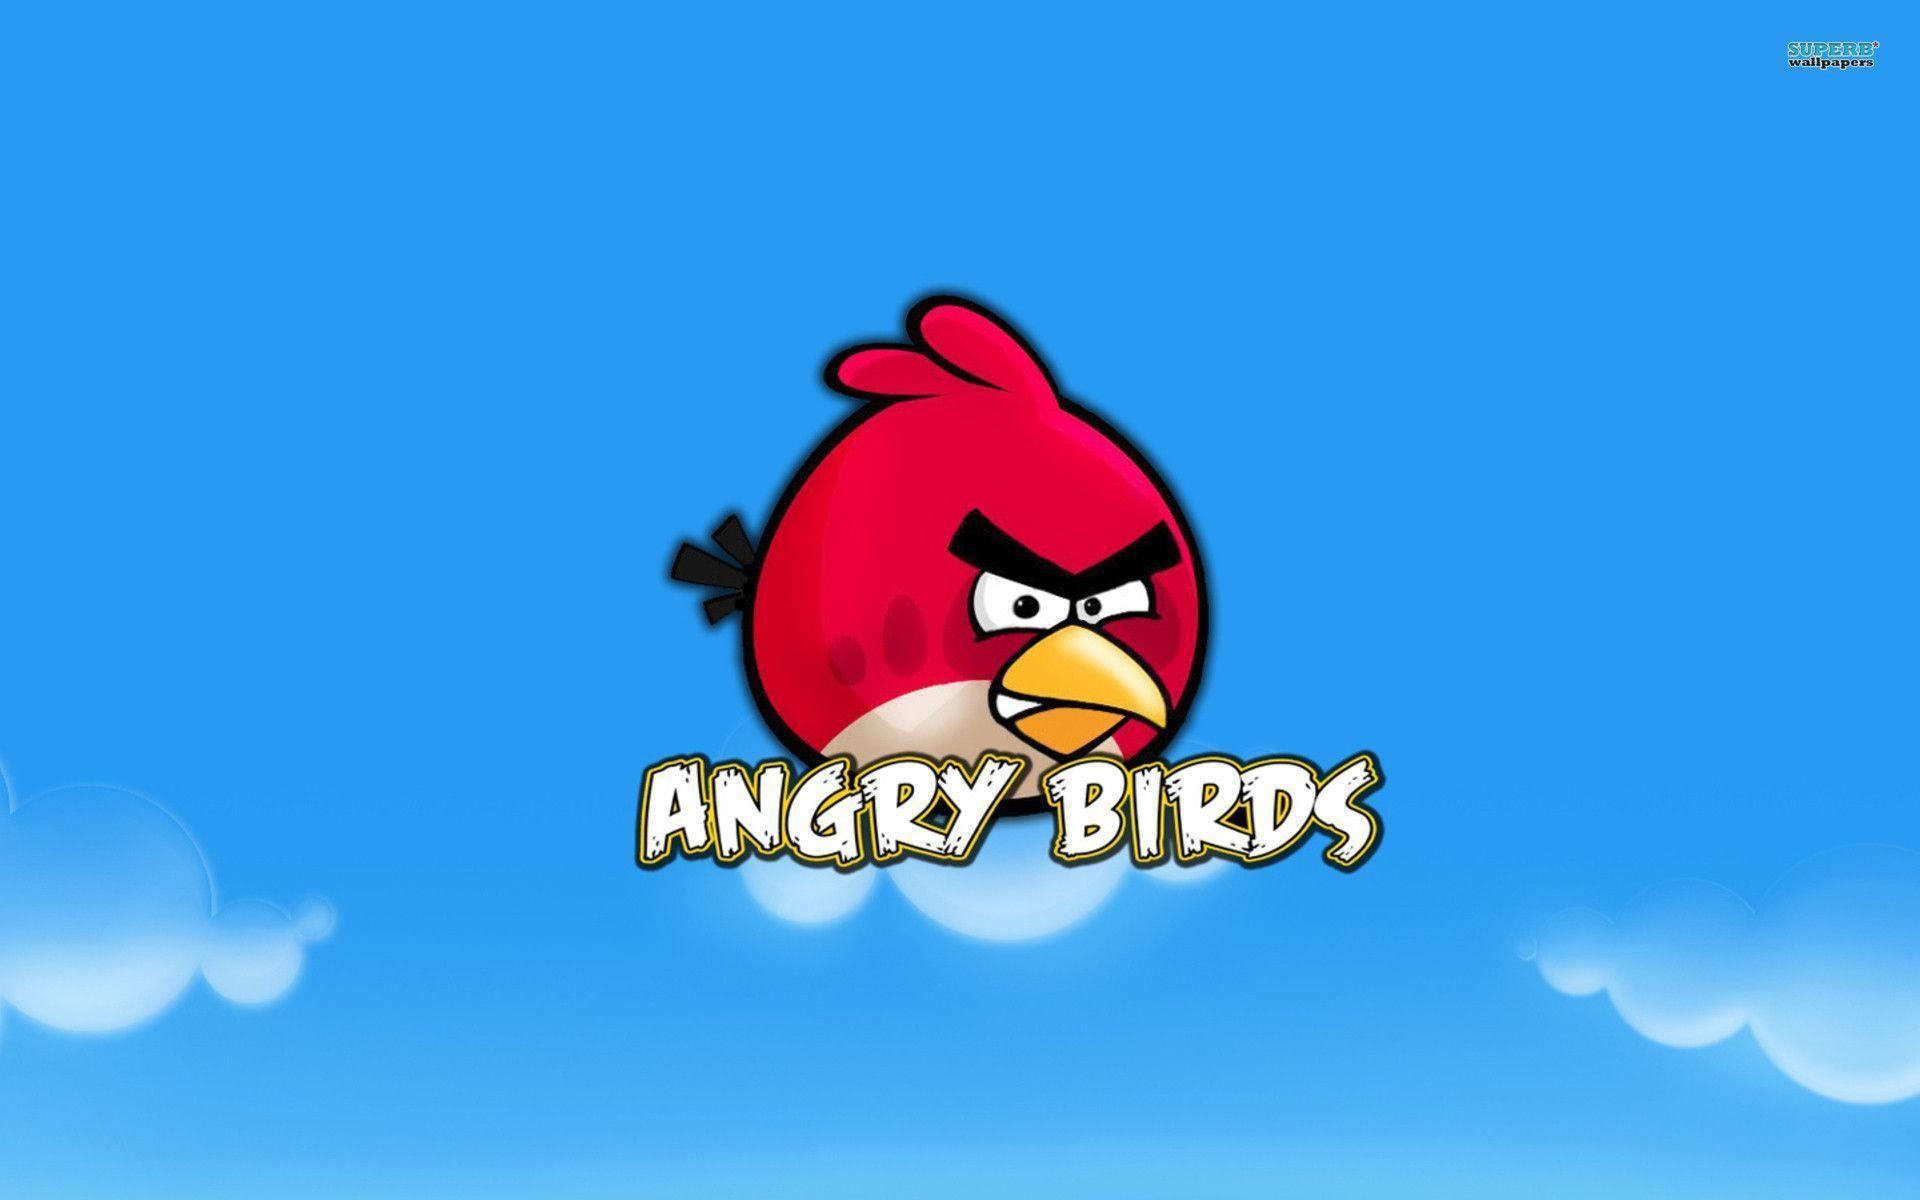 1920x1200 Angry Birds Toon Wallpaper | Wallpapers For Desktop and Mobile